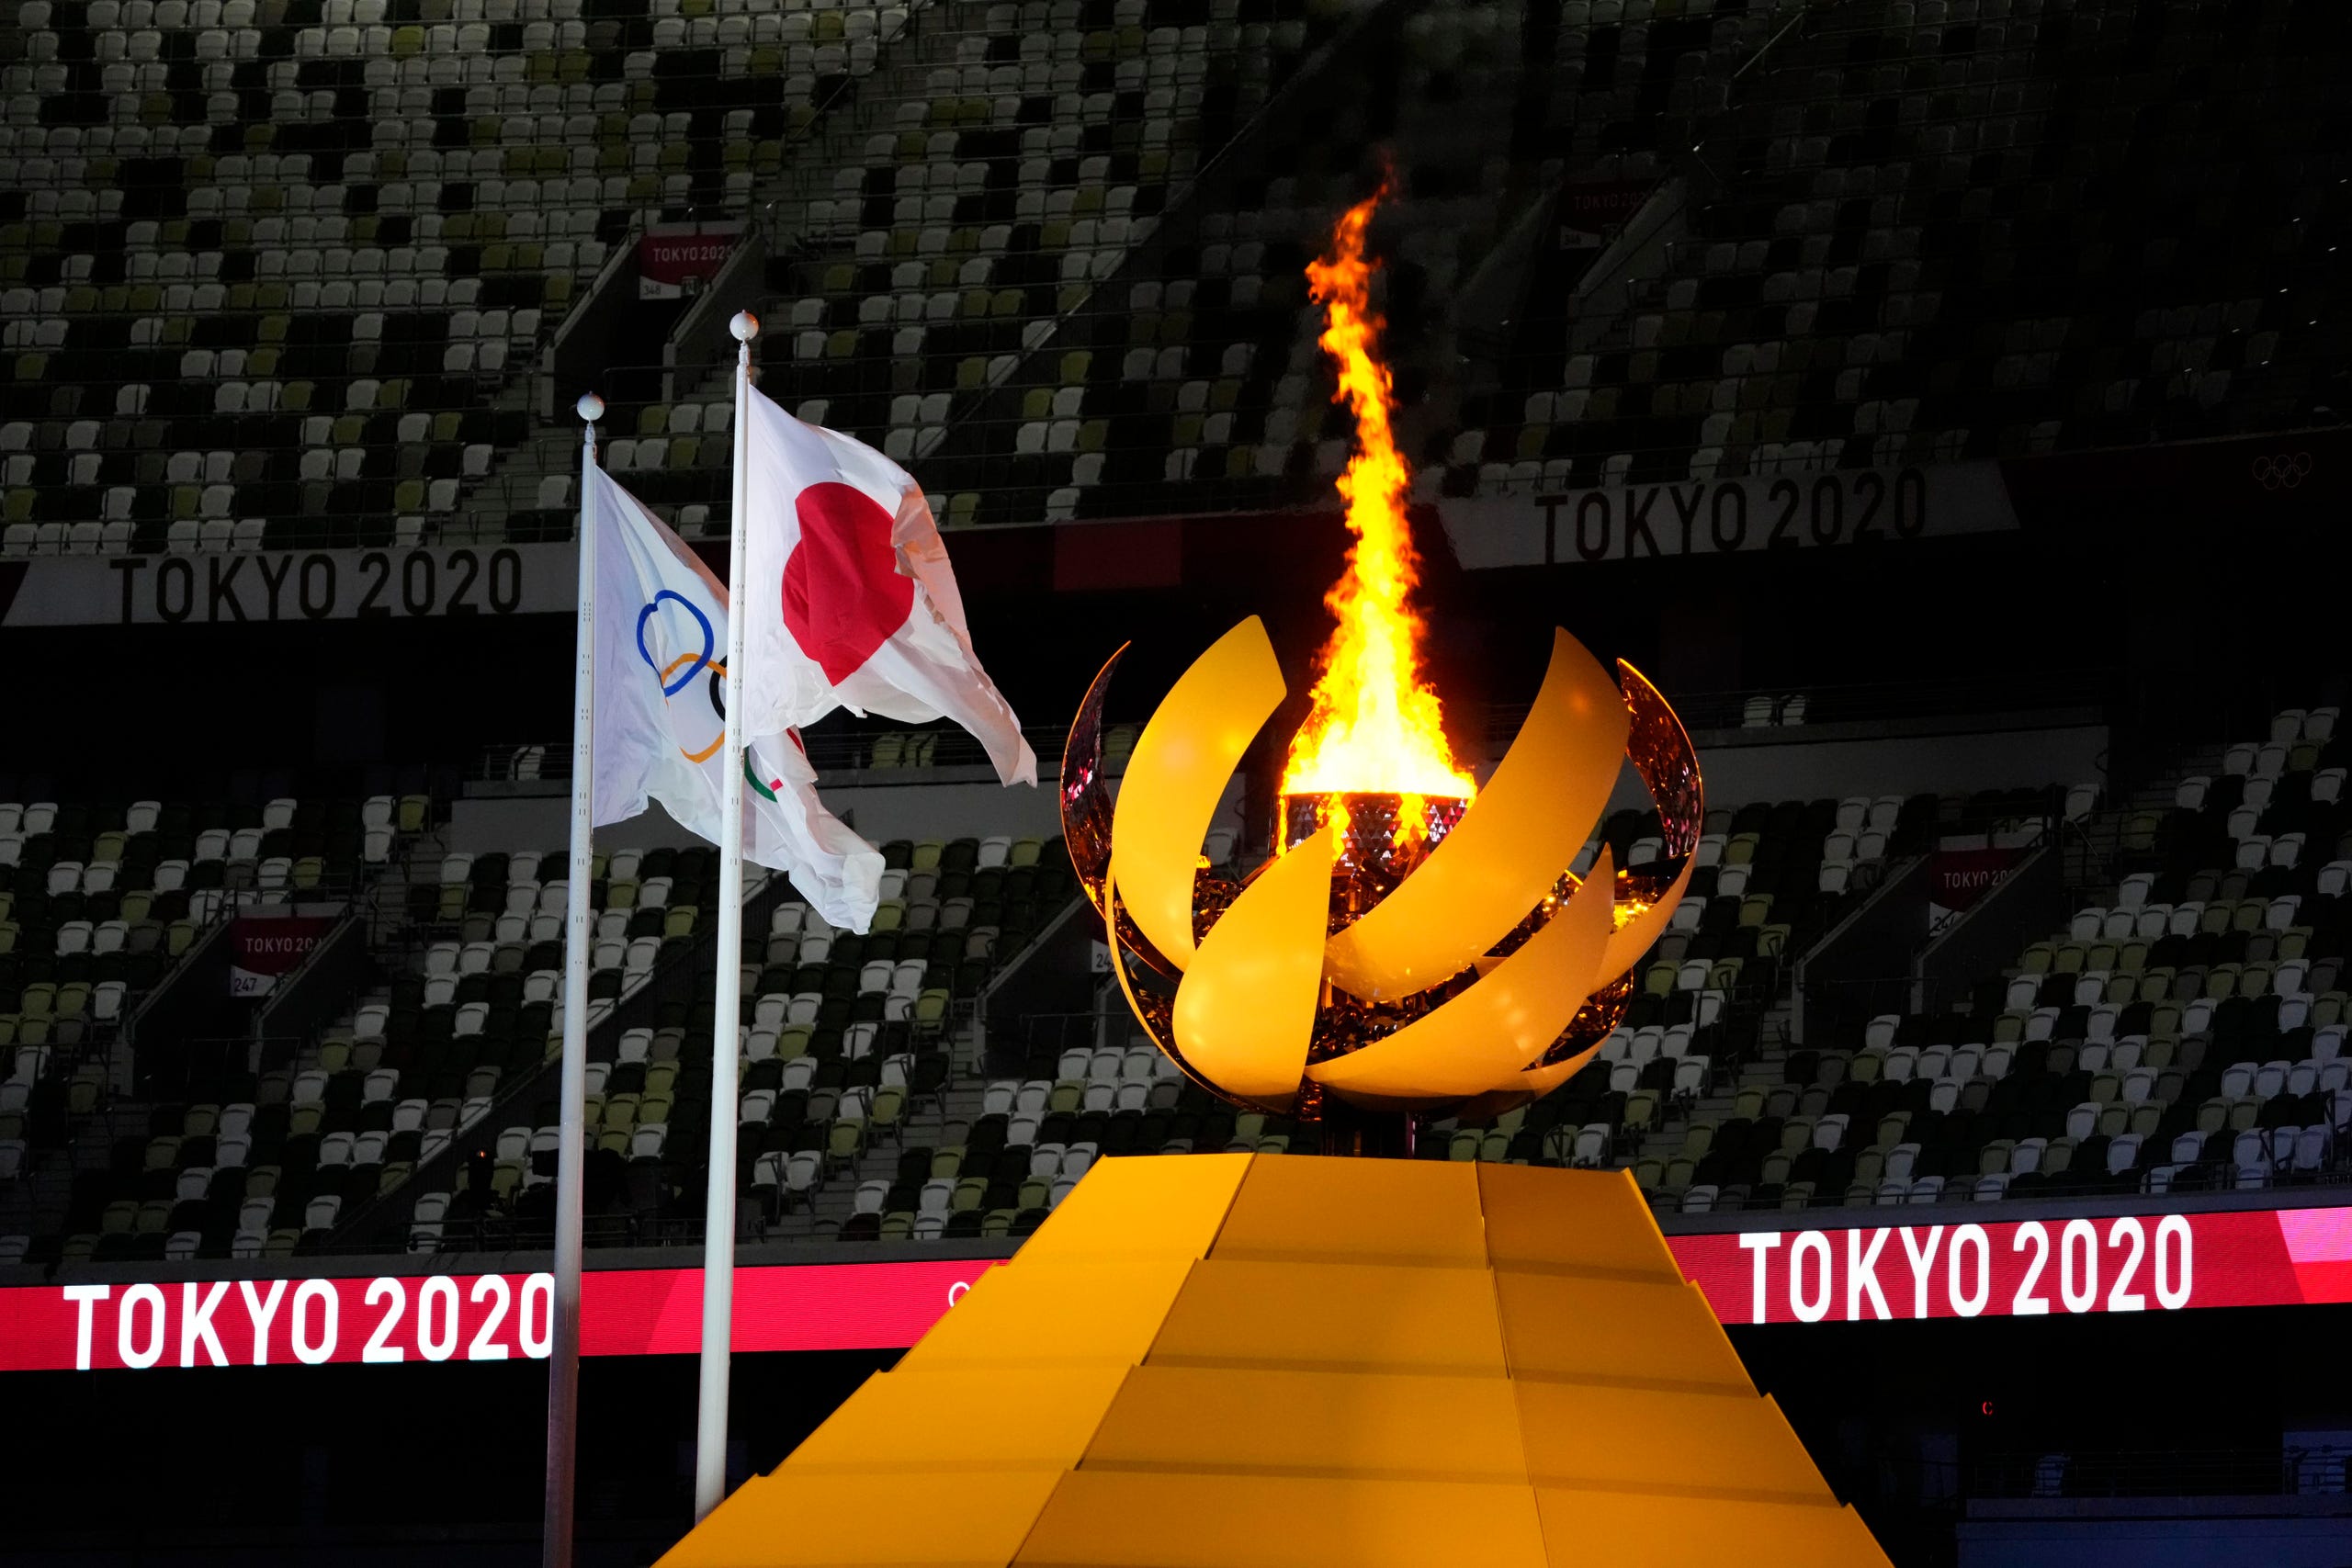 Japan at the expense of the Olympic Games